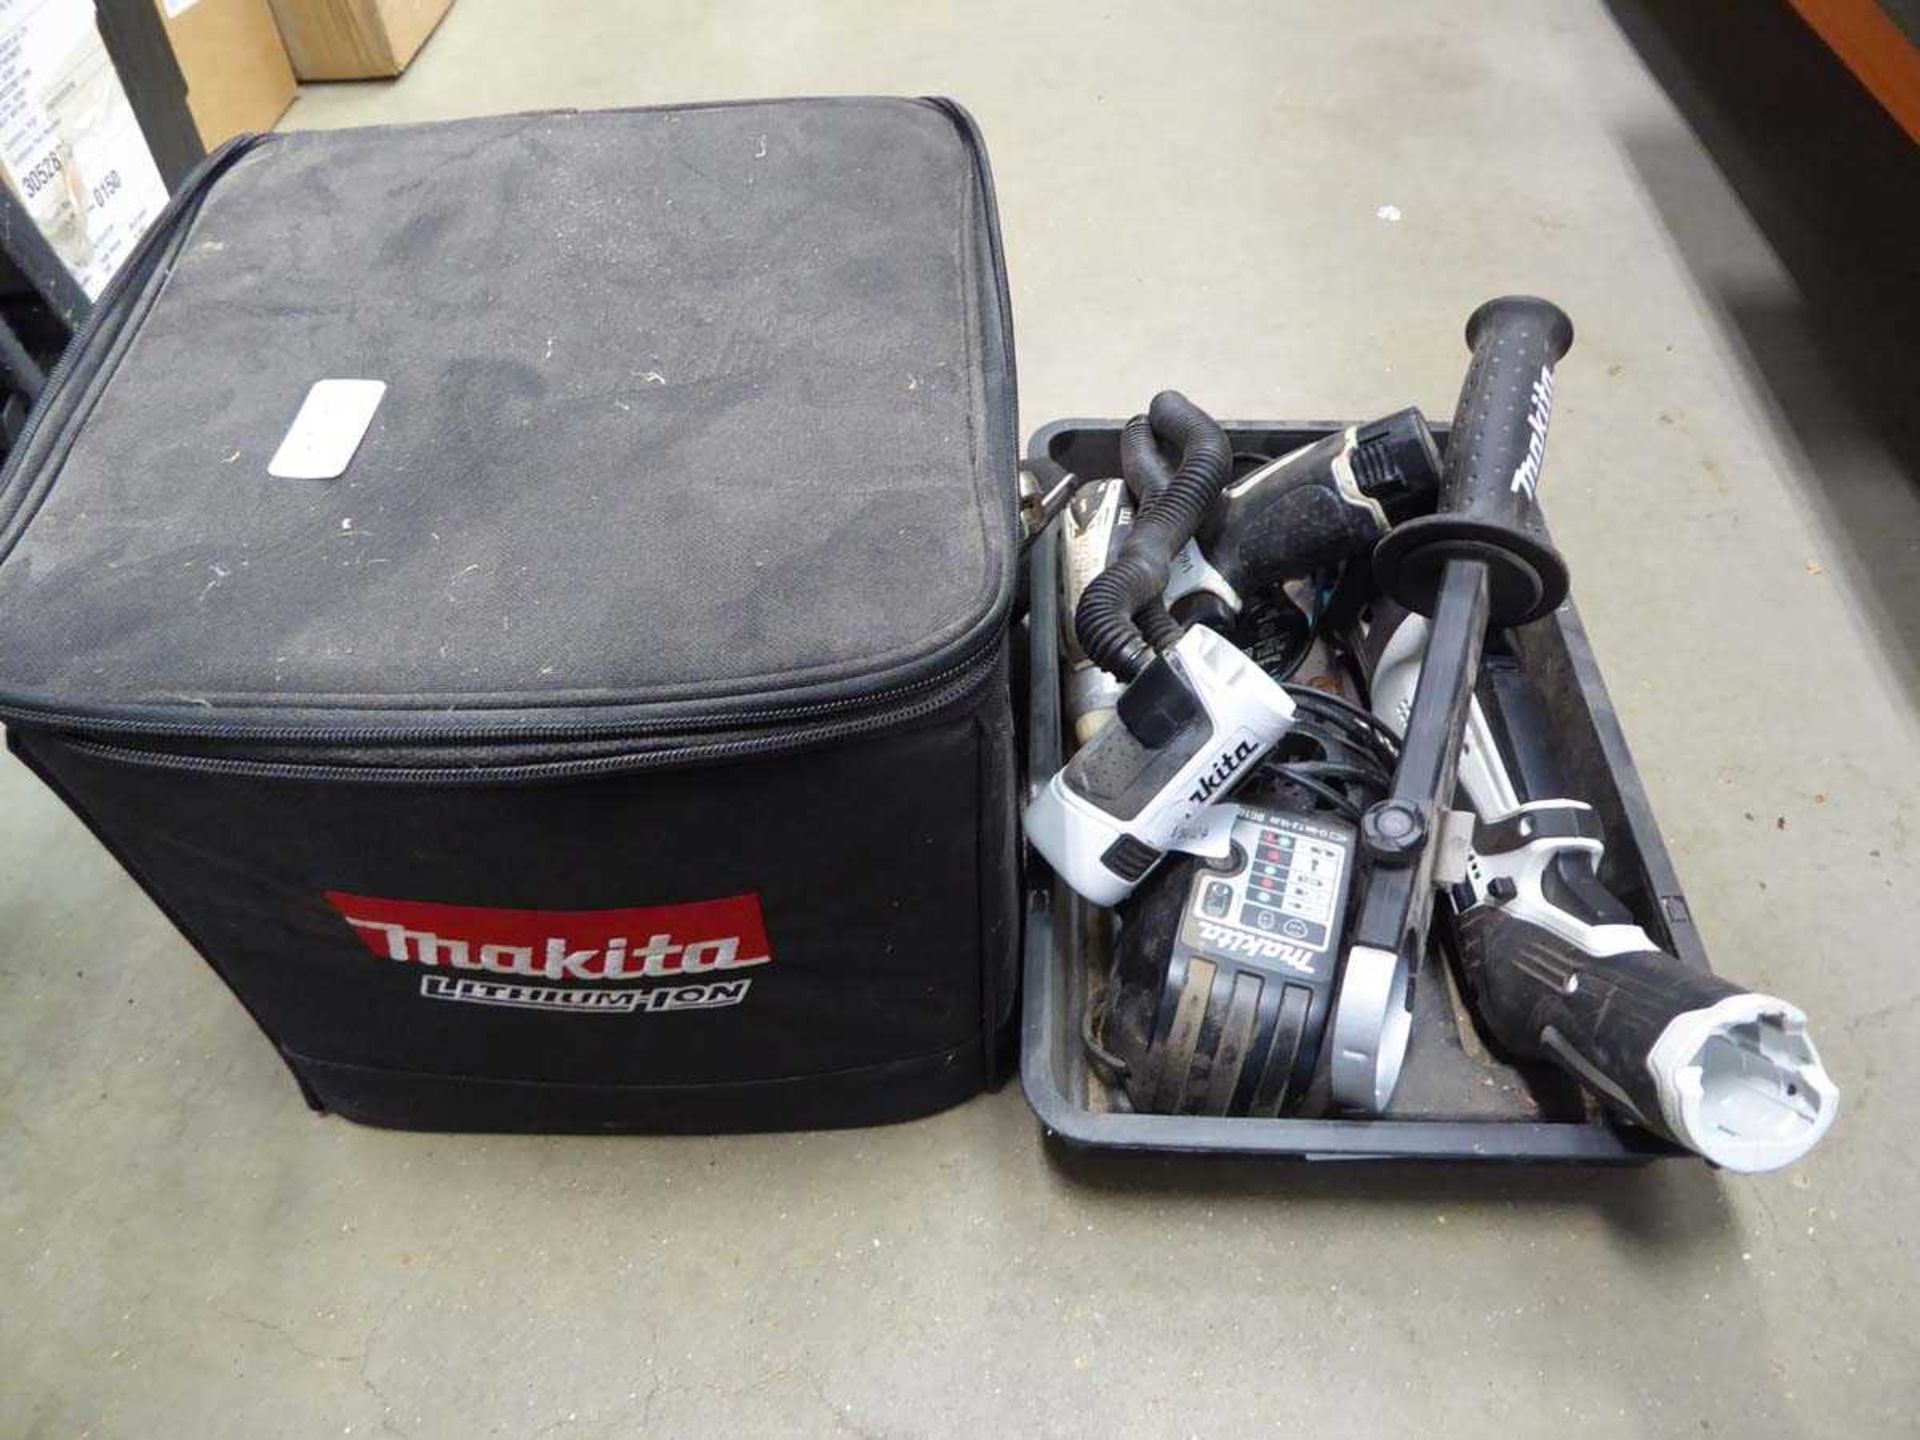 Makita reciprocating cordless saw, torch, and drill driver, together with 3 batteries and charger